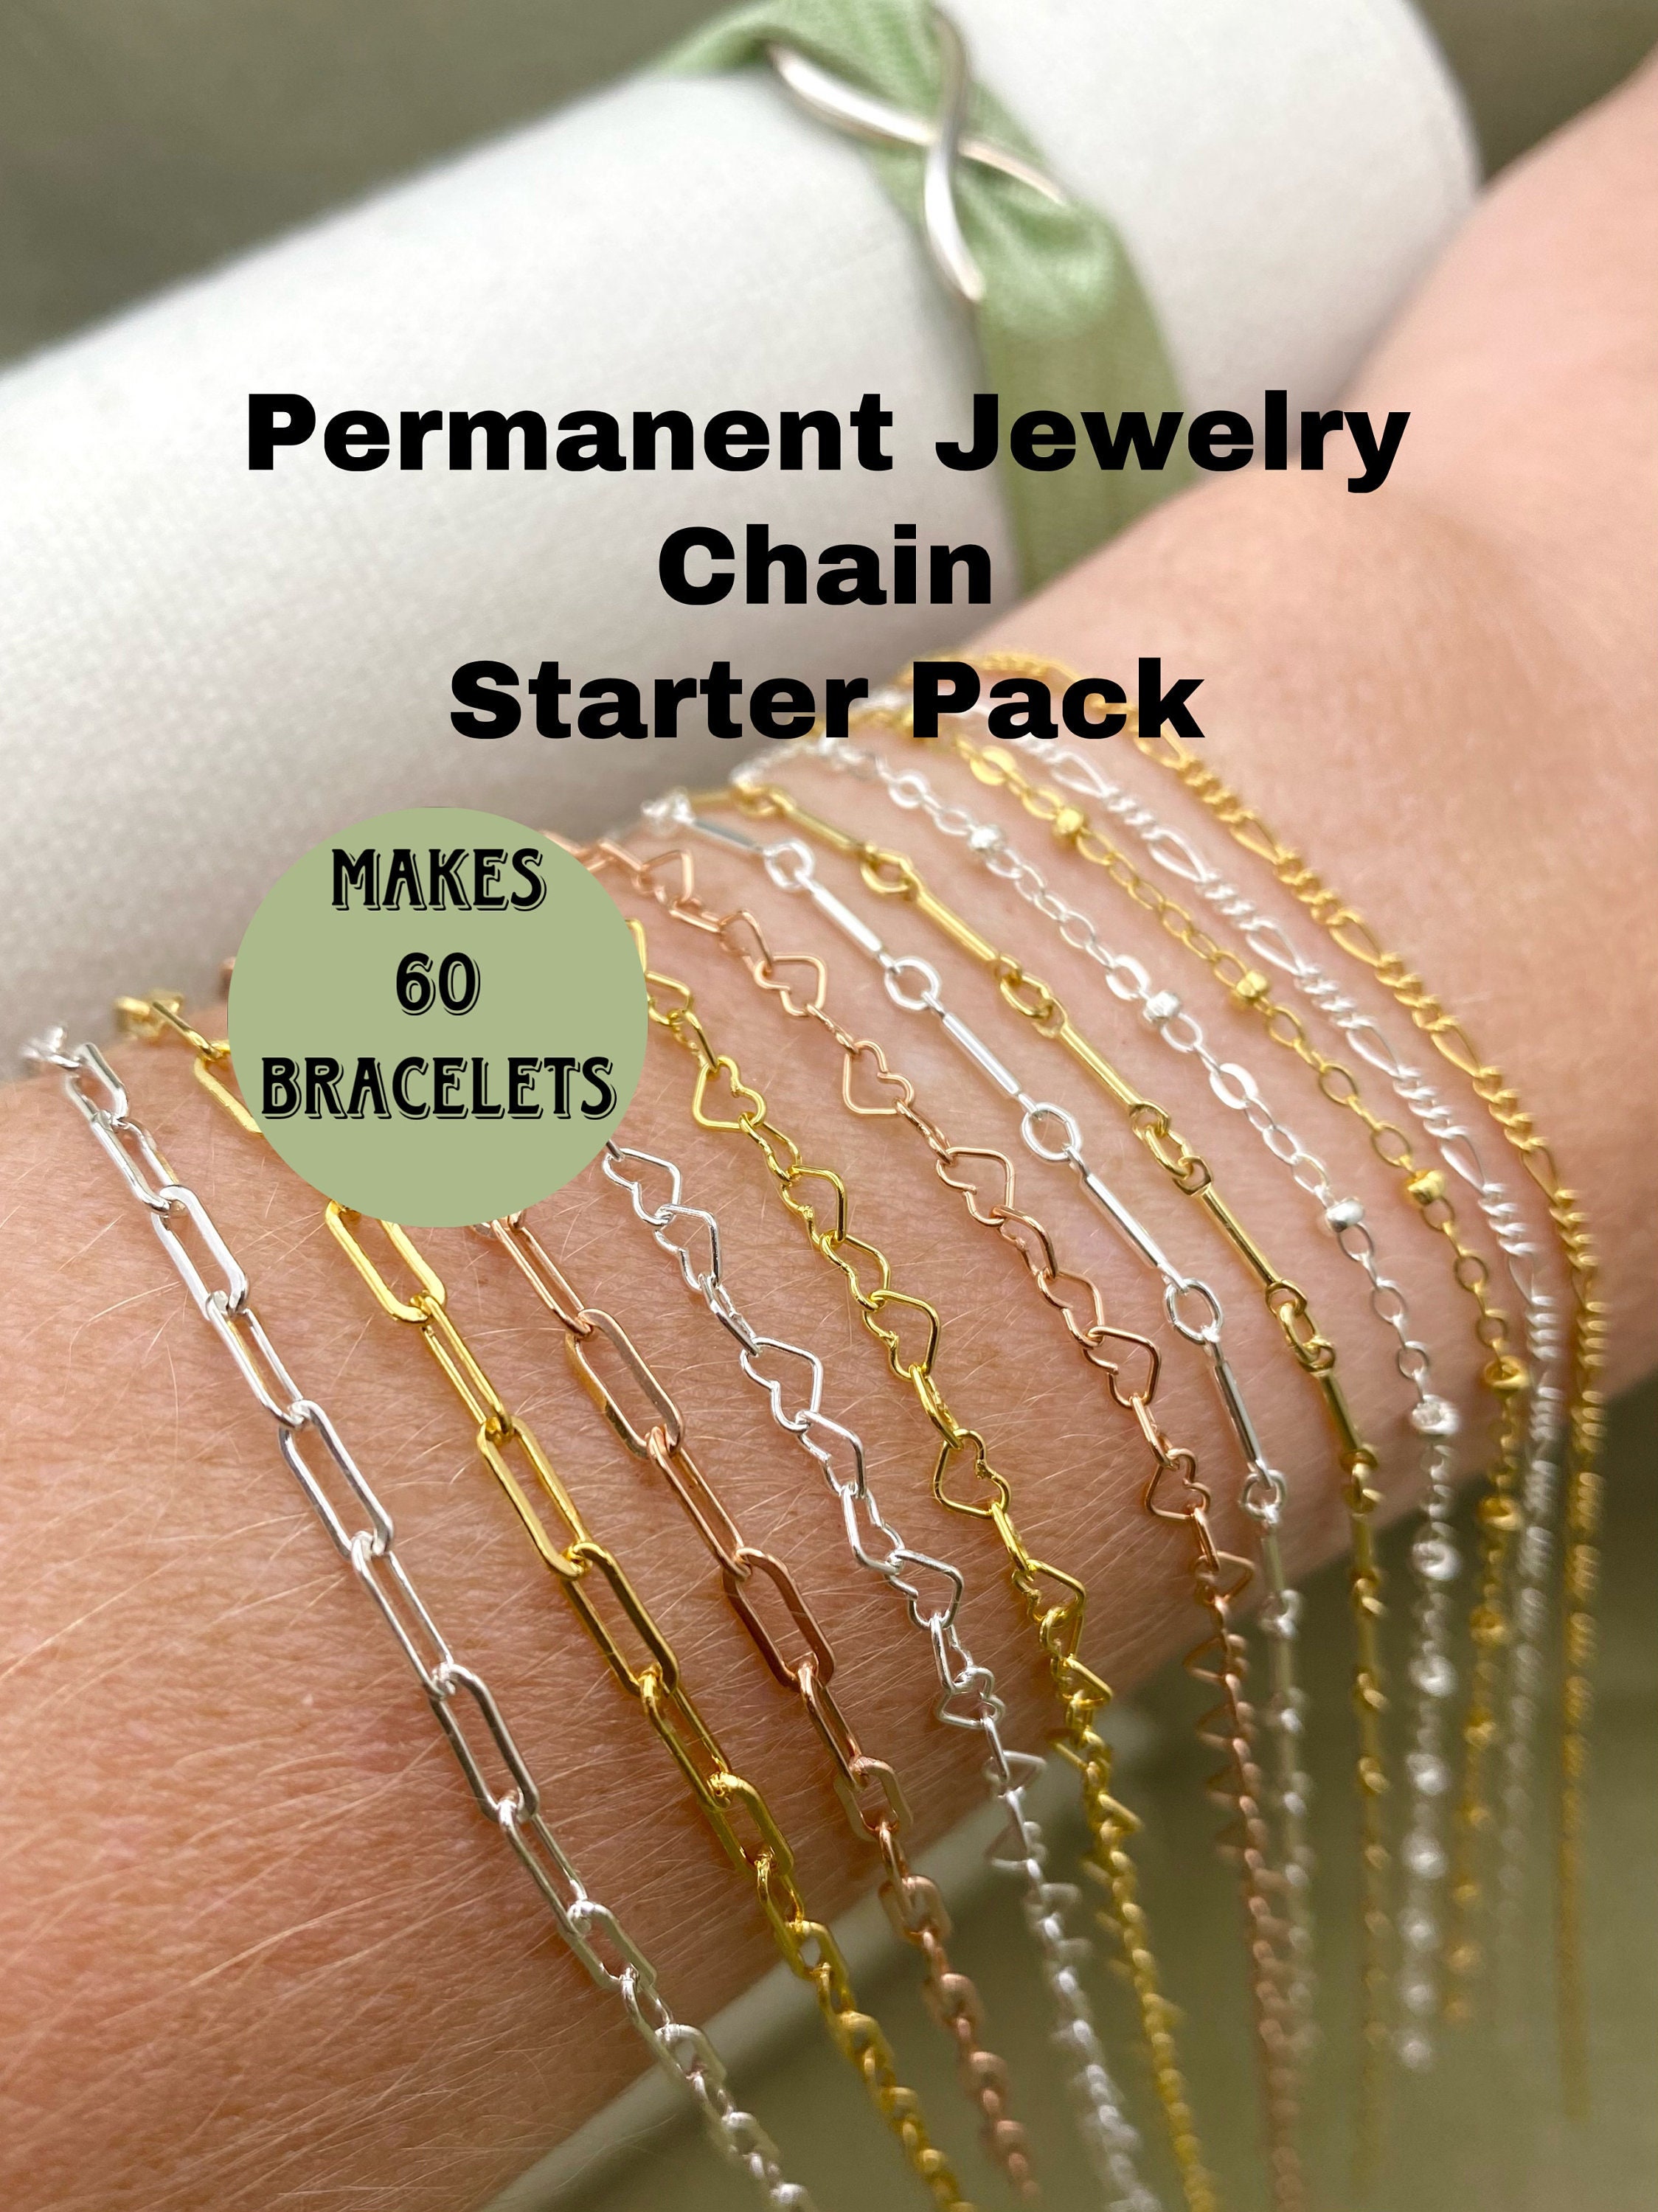 Permanent Jewelry Chain Starter Pack the CLASSIC Kit 12 Chains for Welding  Sterling Silver, 14kt Gold Filled, 14kt Rose Gold Filled 